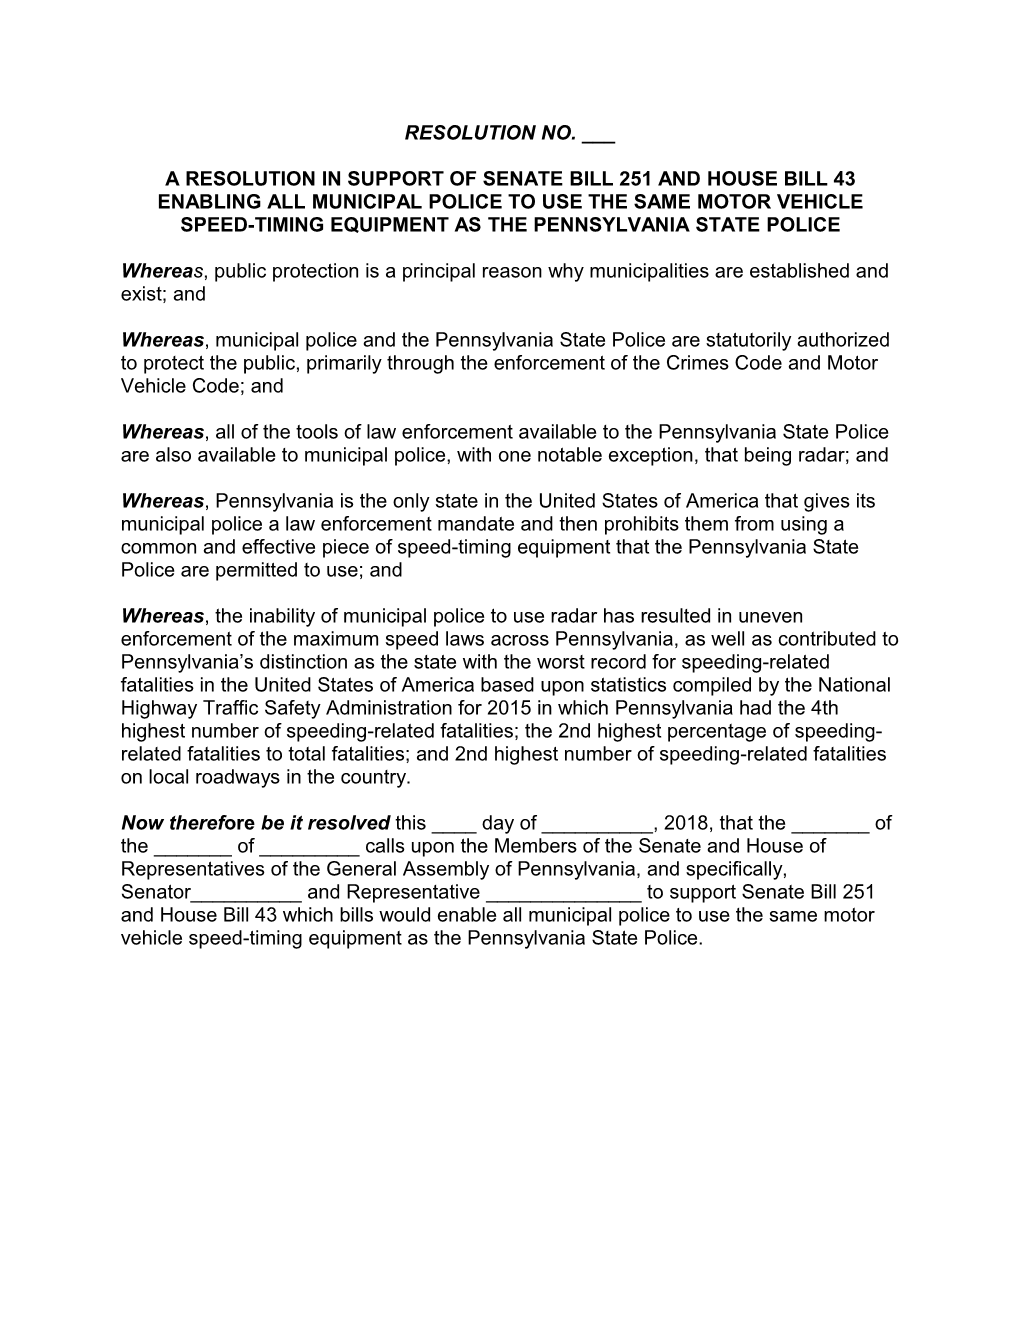 A Resolution in Support of Senate Bill 251 and House Bill 43 Enabling All Municipal Police